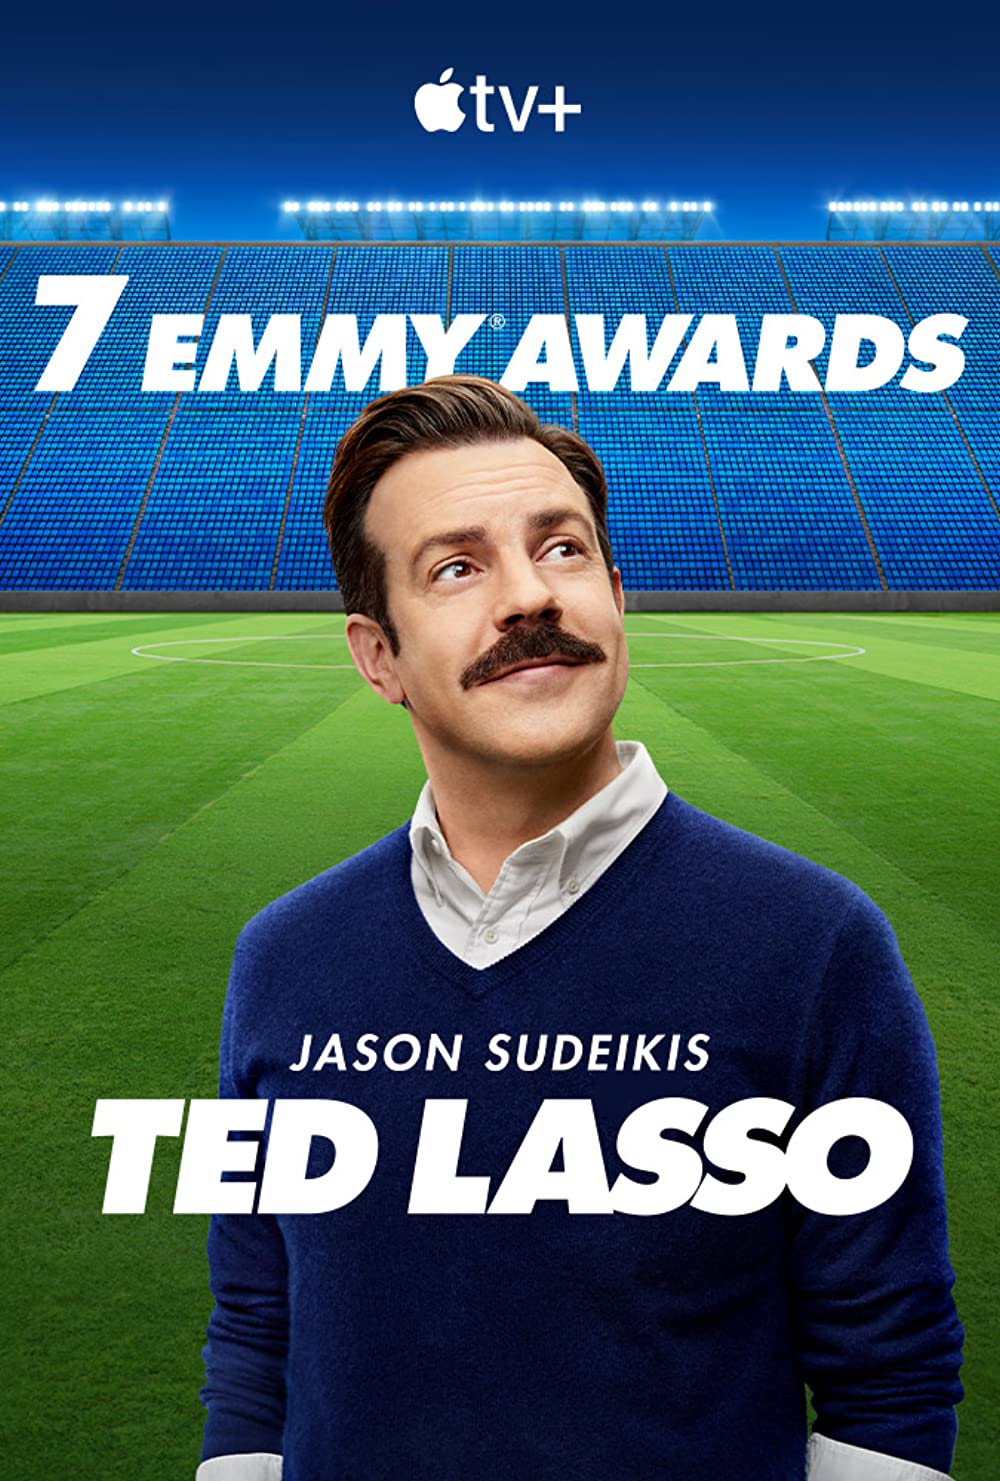 Ted-Lasso-Best-TV-Shows-on-Apple-TV - Pop Culture, Entertainment, Humor,  Travel & More